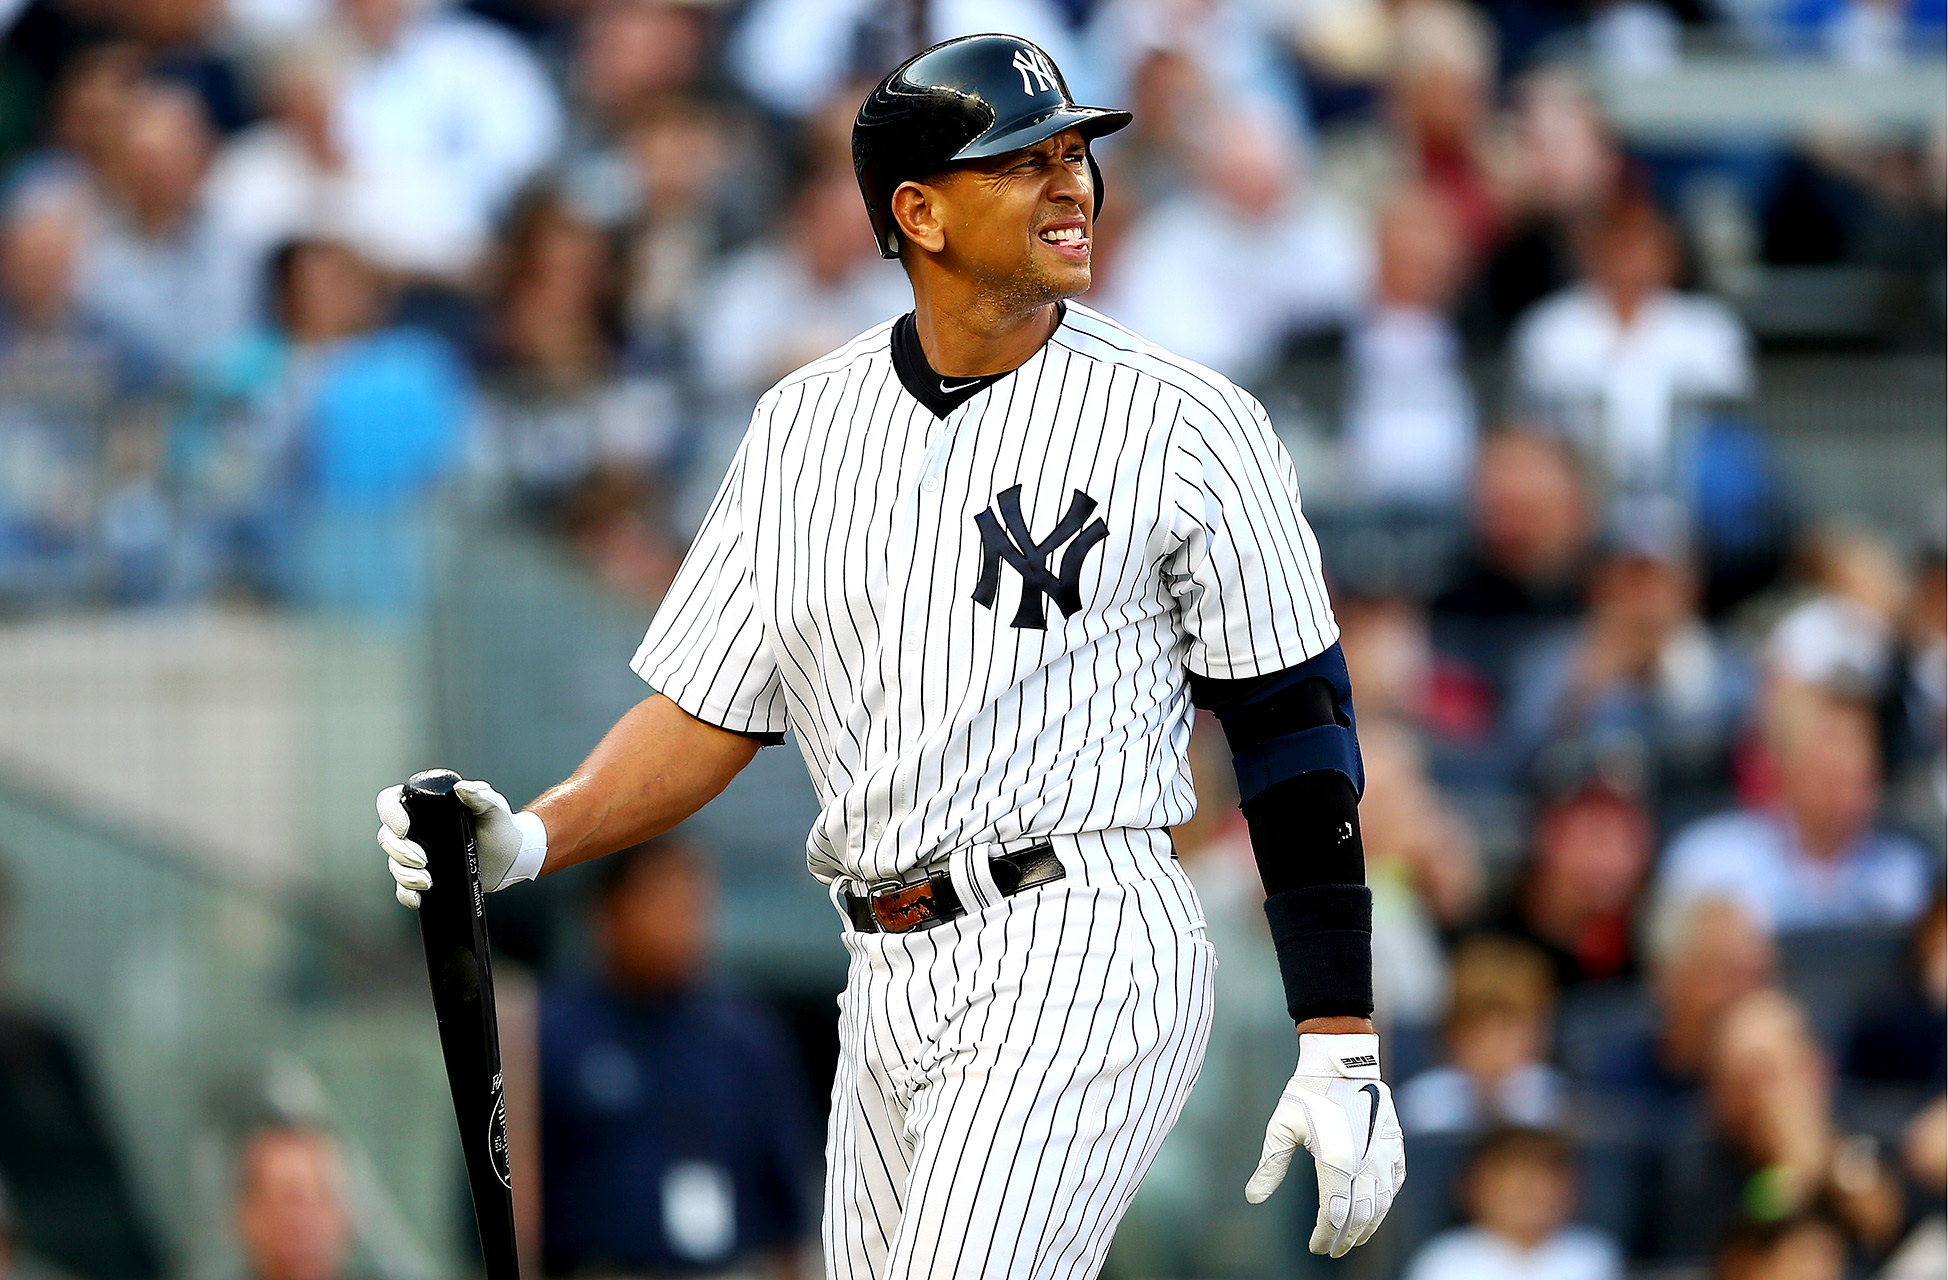 A-Rod's Highs and Lows: The complicated career of Alex Rodriguez